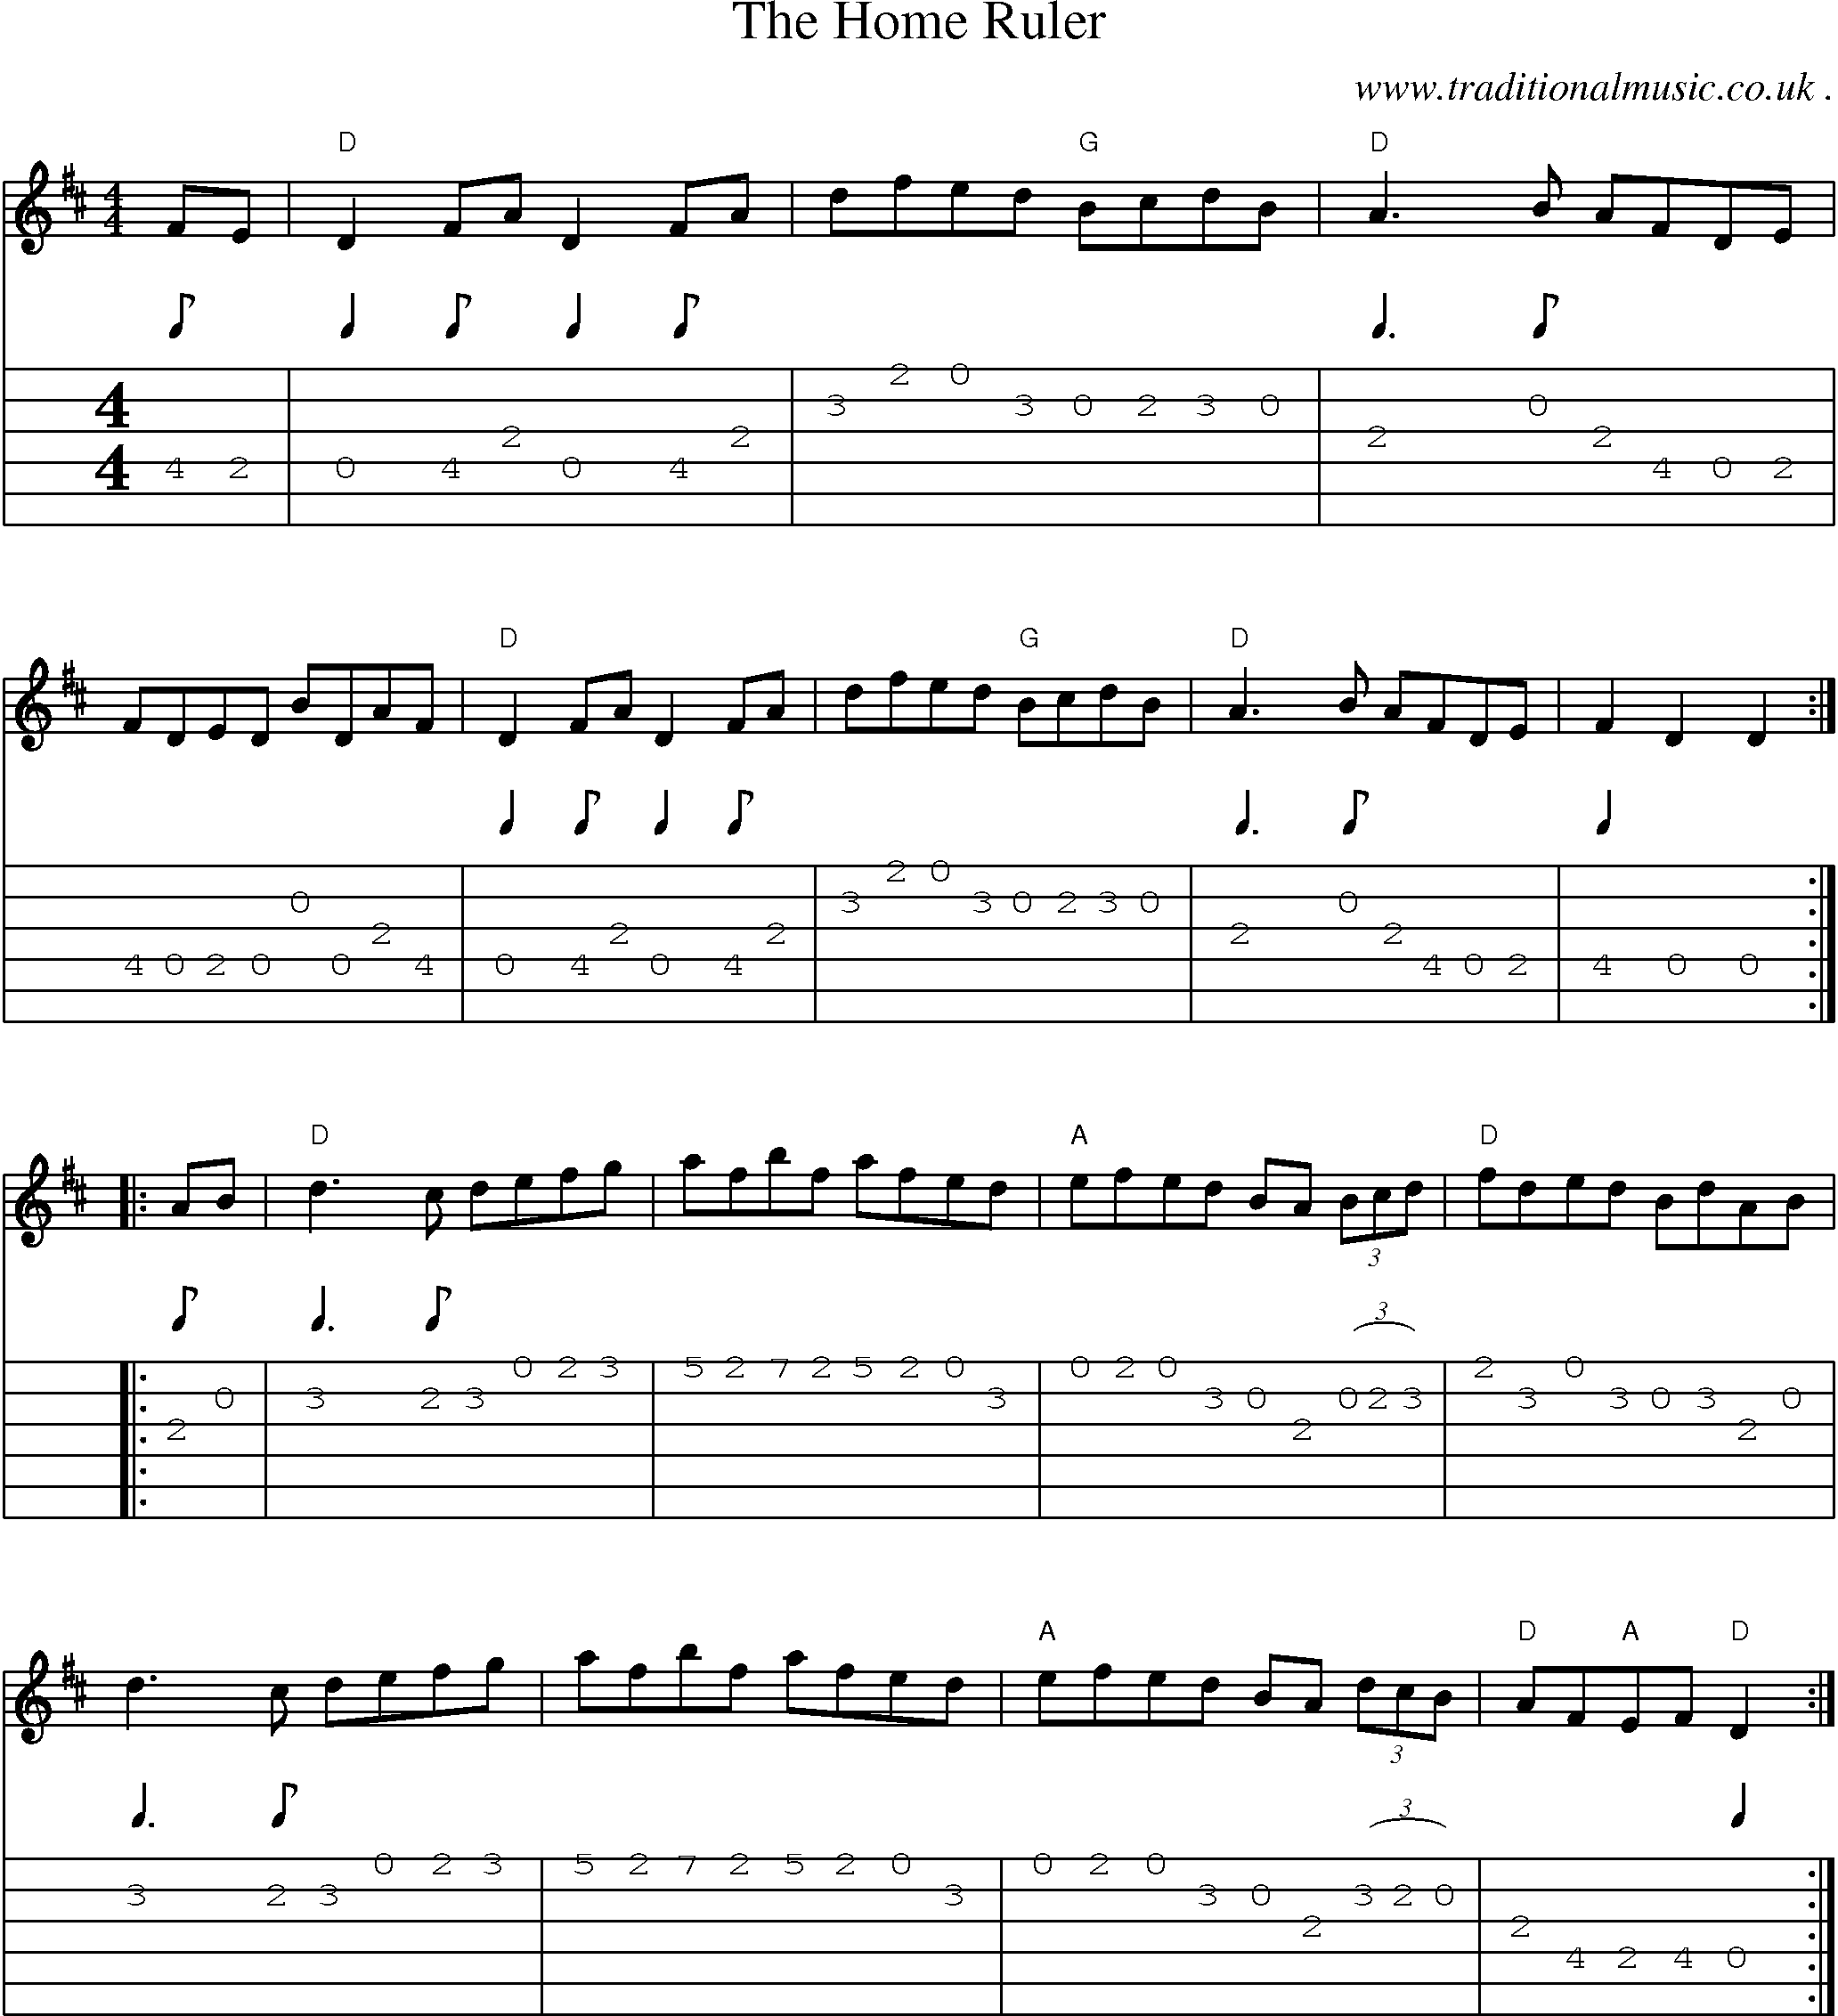 Music Score and Guitar Tabs for The Home Ruler